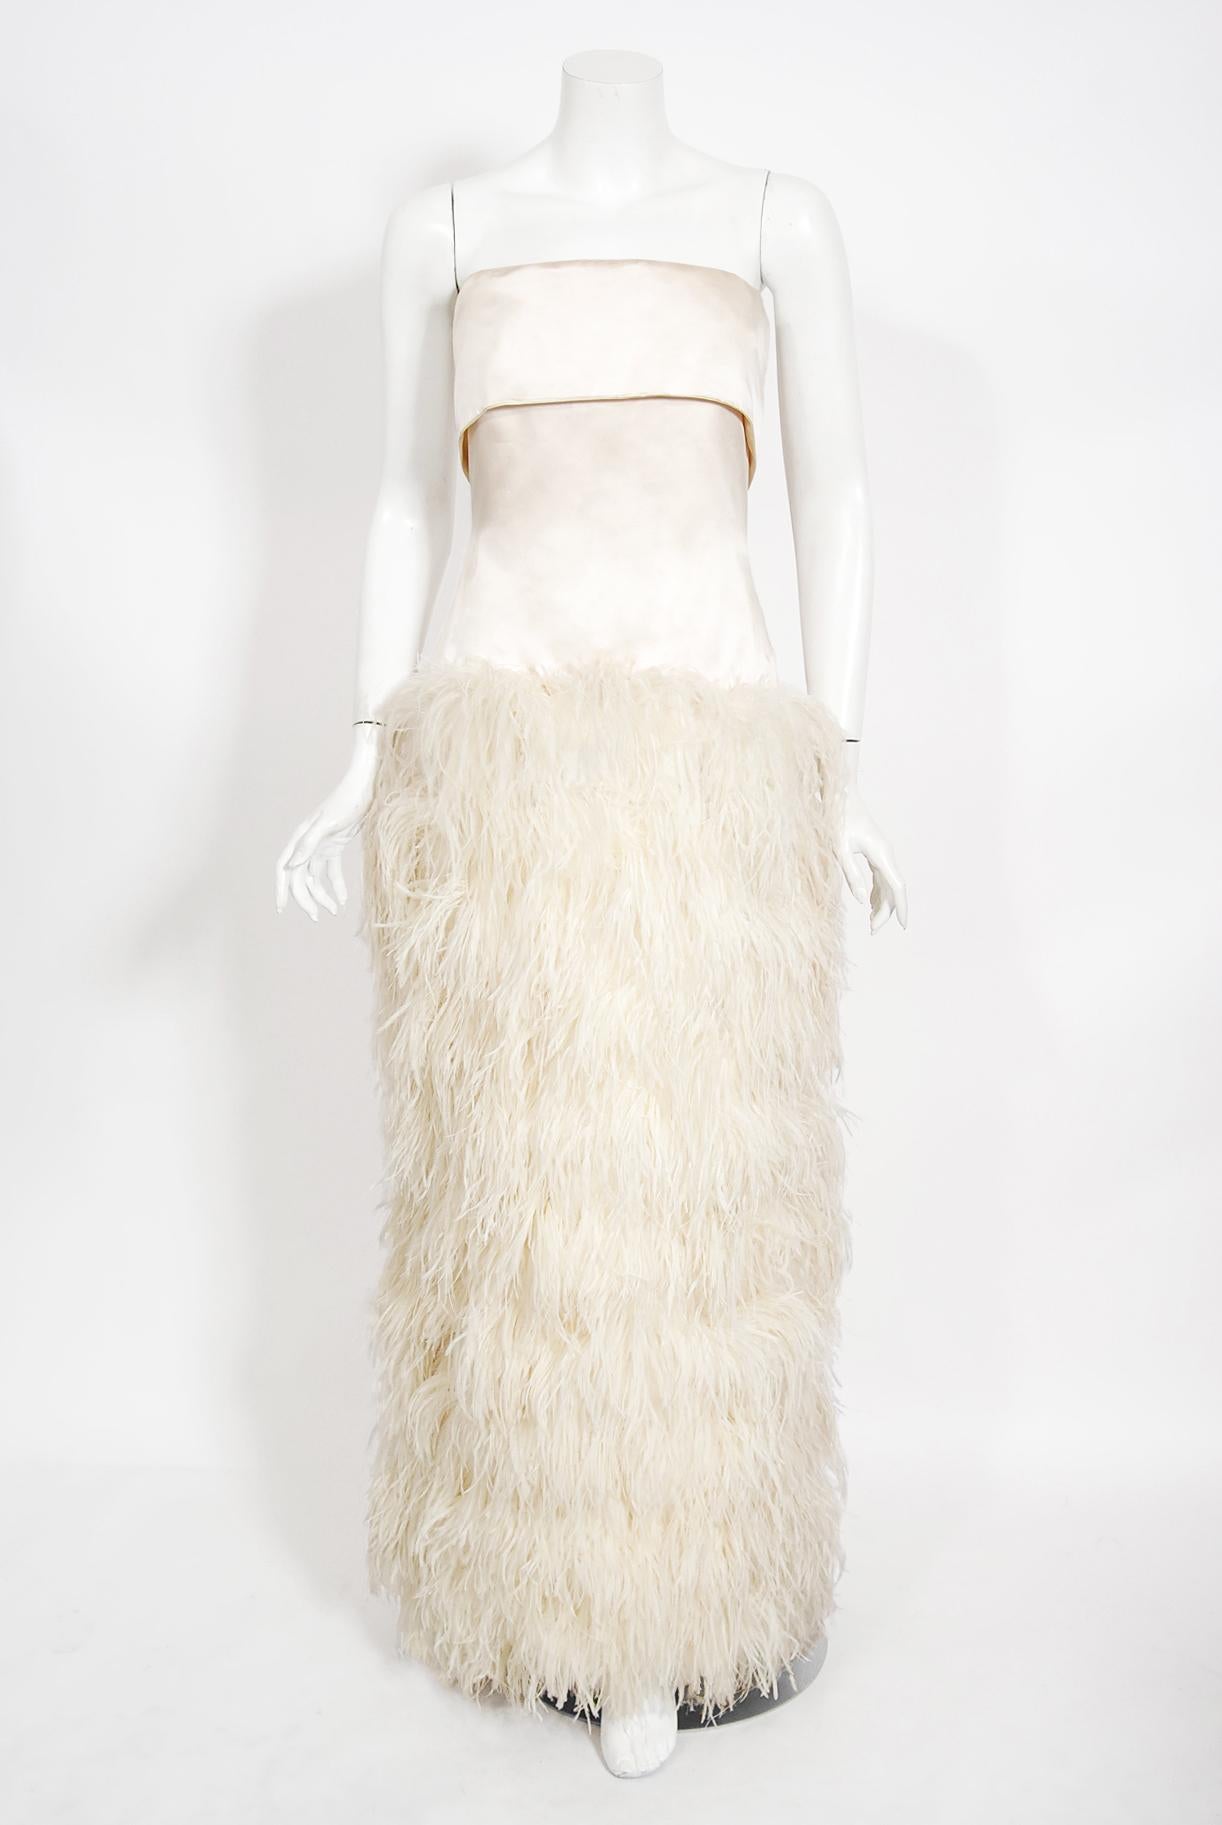 An absolutely gorgeous Arnold Scaasi custom couture ivory silk-satin feathered gown dating back to the mid 1960's. Scaasi started his career designing for Charles James in the 1950's. He opened his own ready-to-wear business with $2,000 in savings